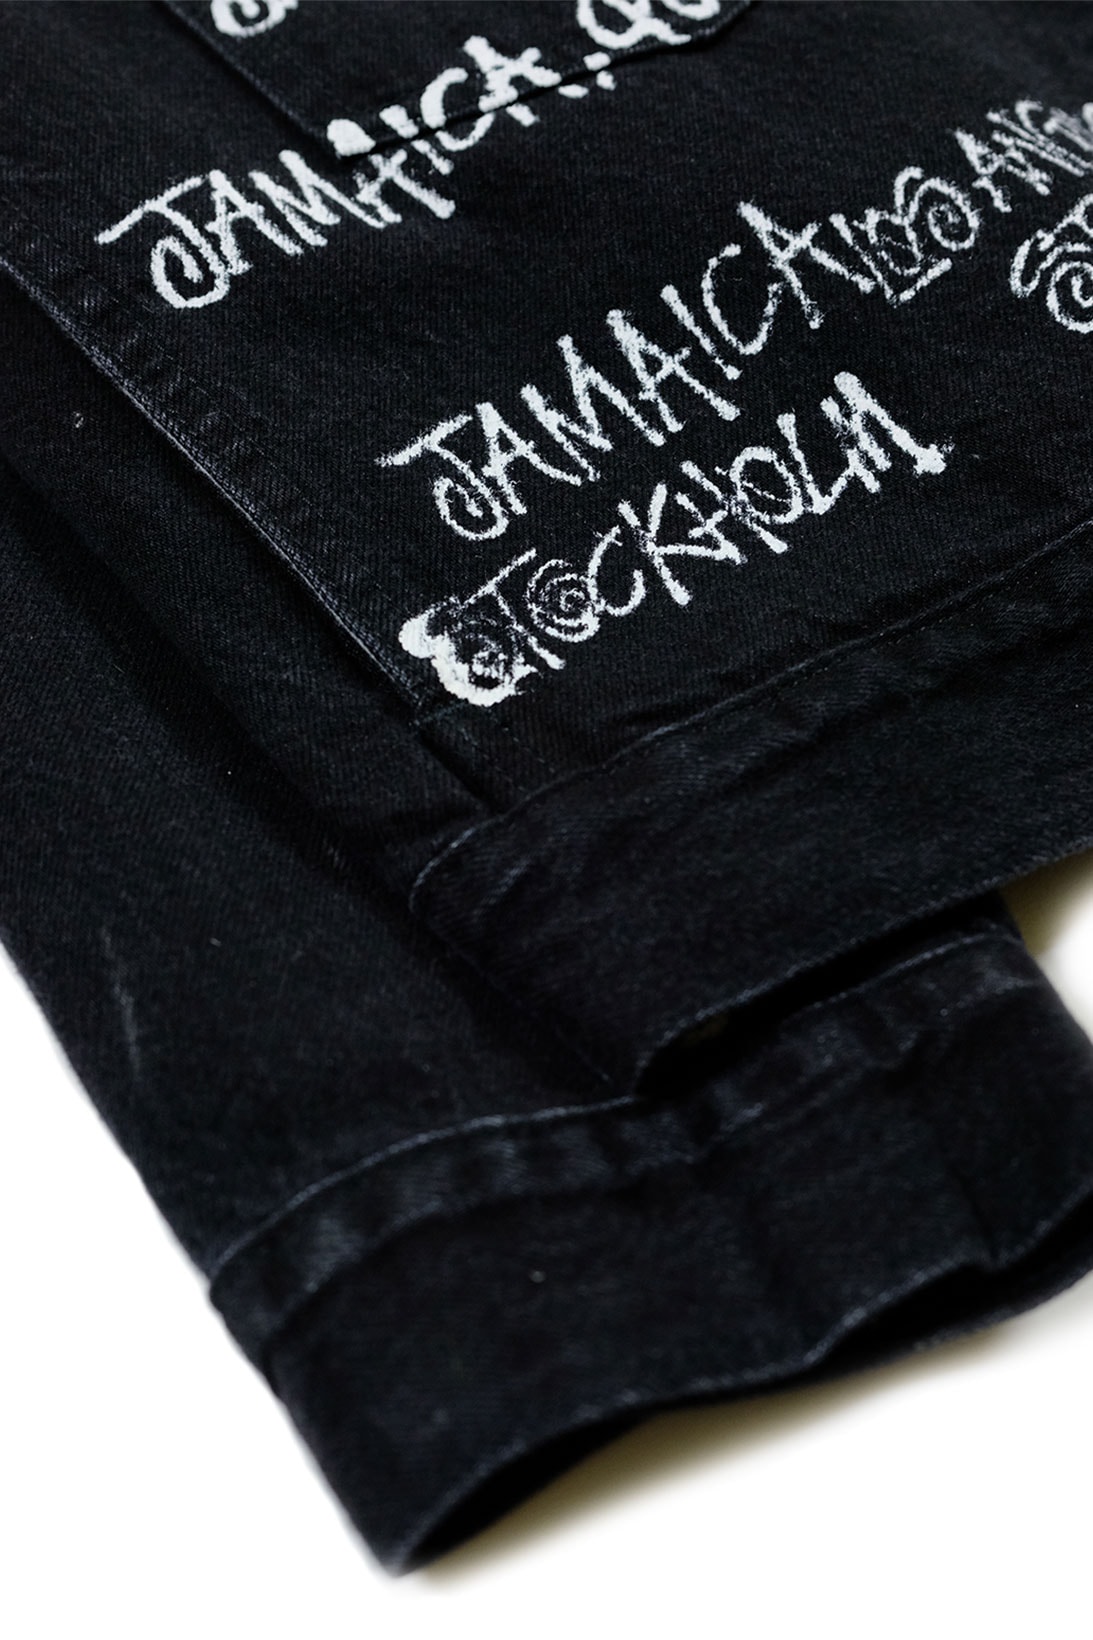 Stussy Denim Tears Our Legacy Collaboration Jeans Release Where to buy